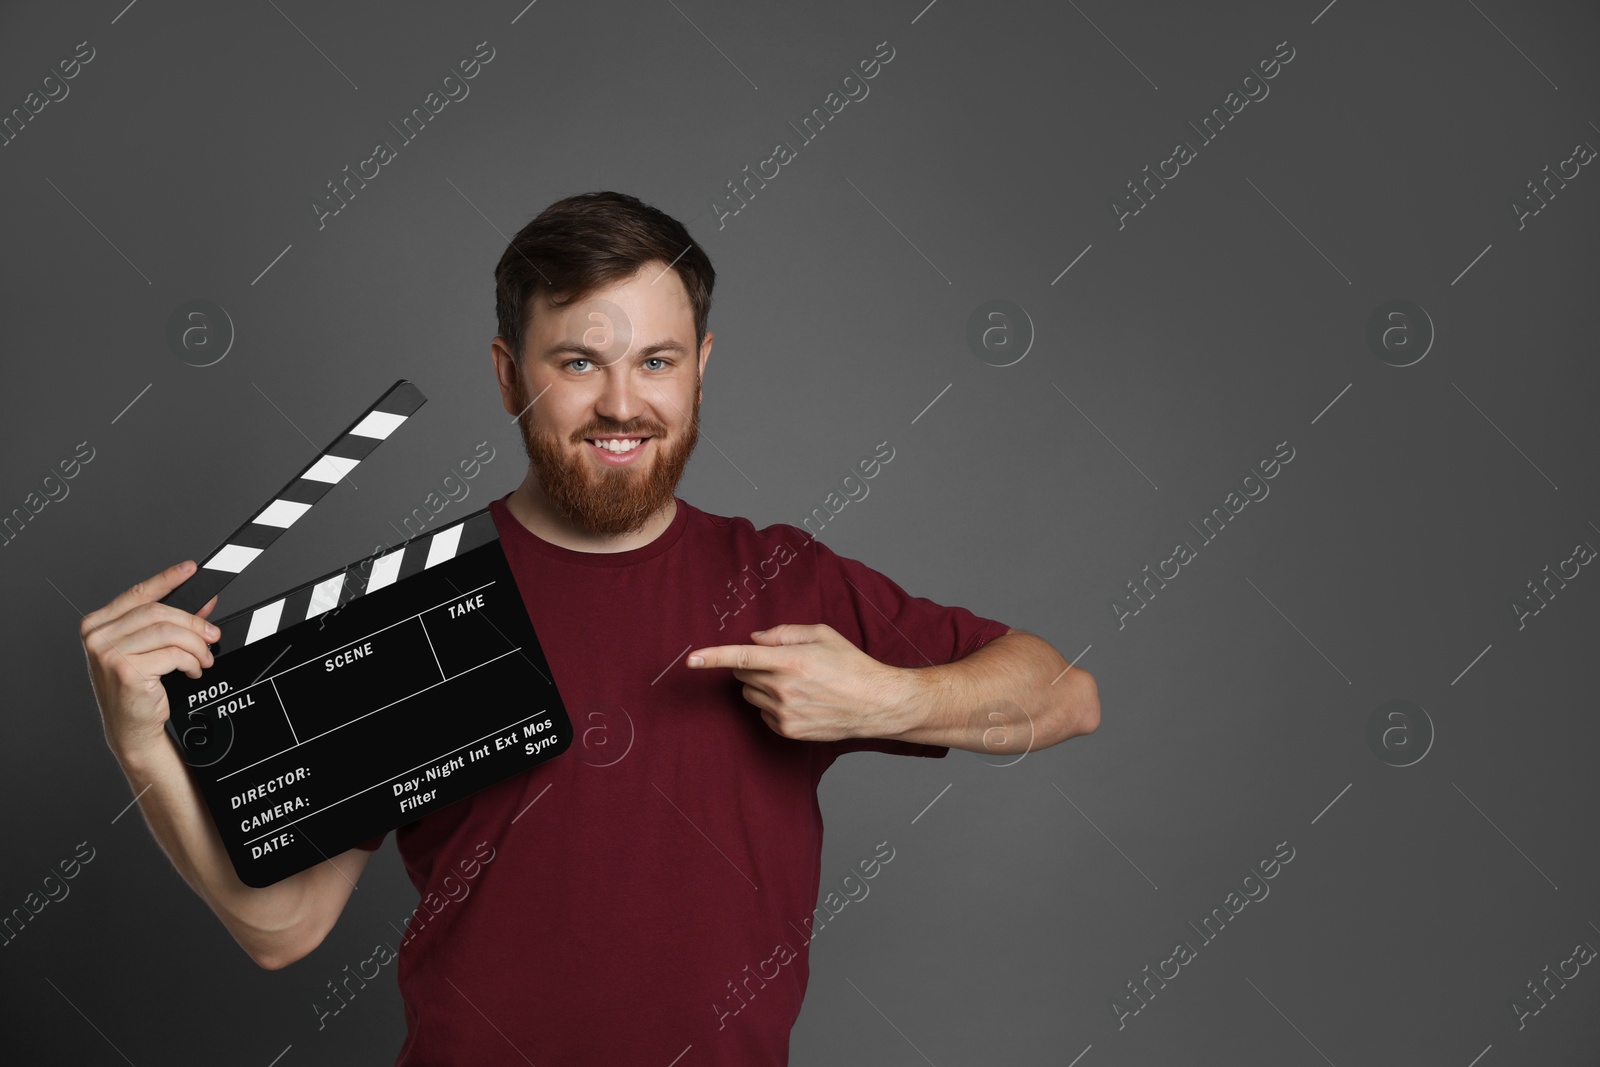 Photo of Making movie. Smiling man pointing at clapperboard on grey background. Space for text